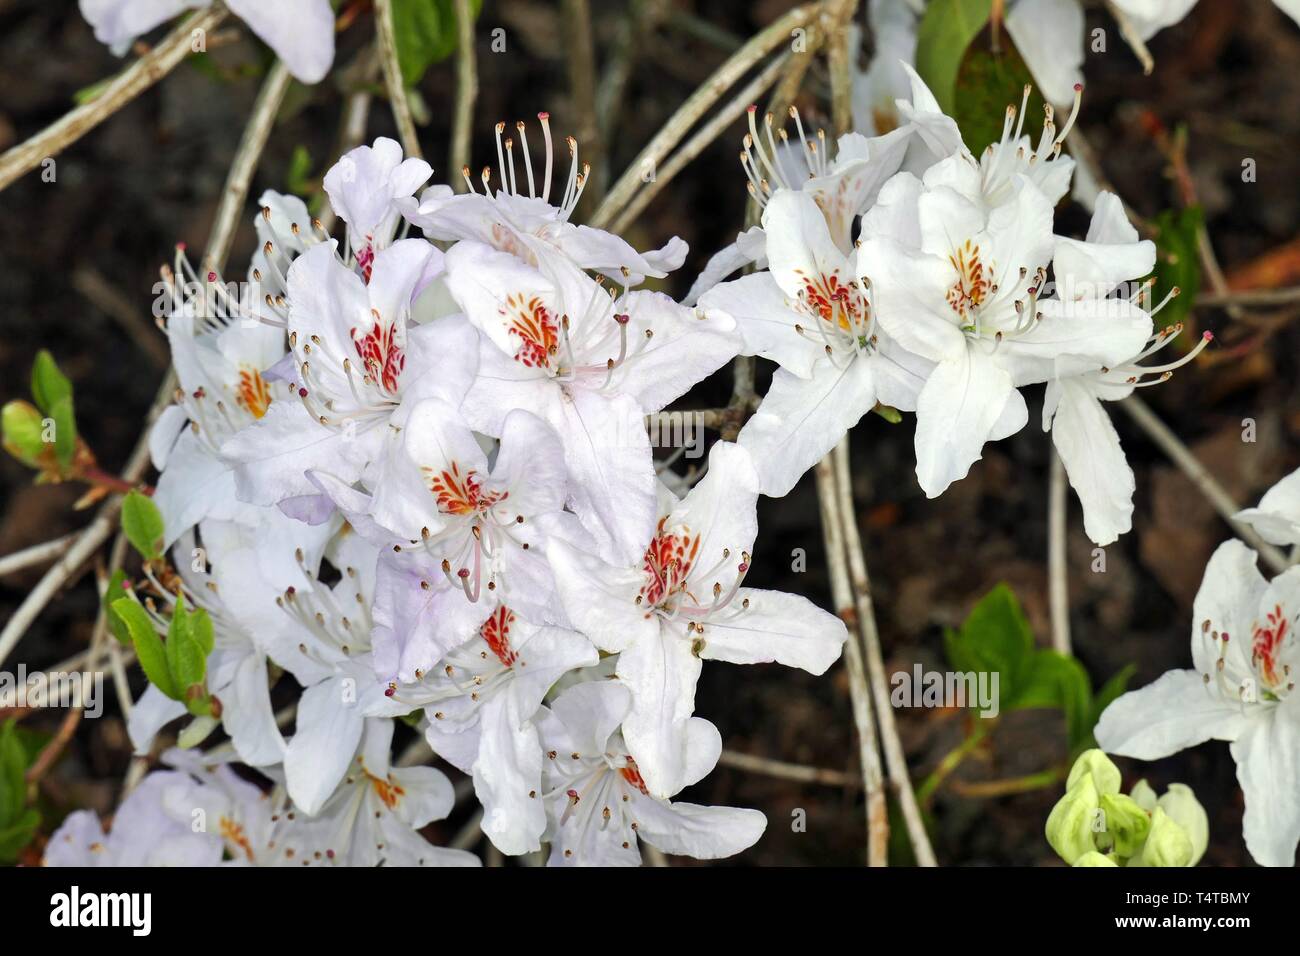 Blooming Rhododendron (Rhododendron), yunnanense white, springtime in the Rhododendron Park, Bremen, Germany, Europe Stock Photo